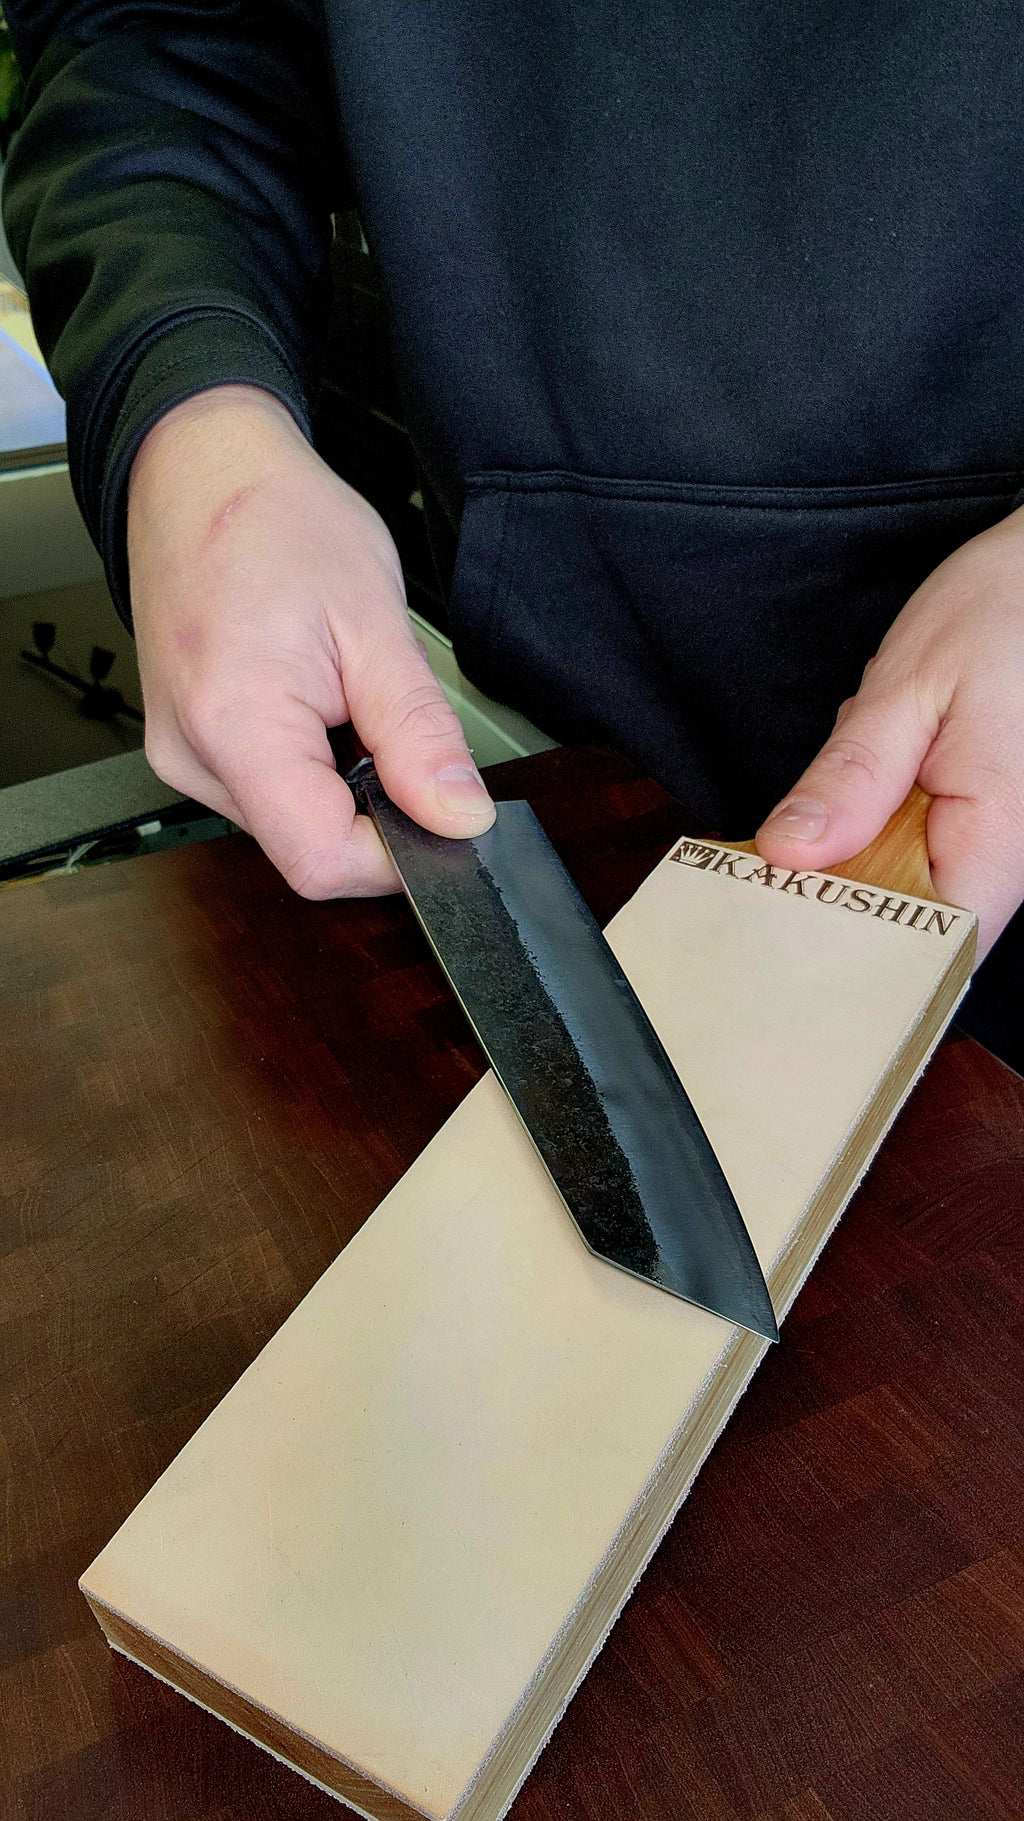 Using a leather strop on kitchen knives